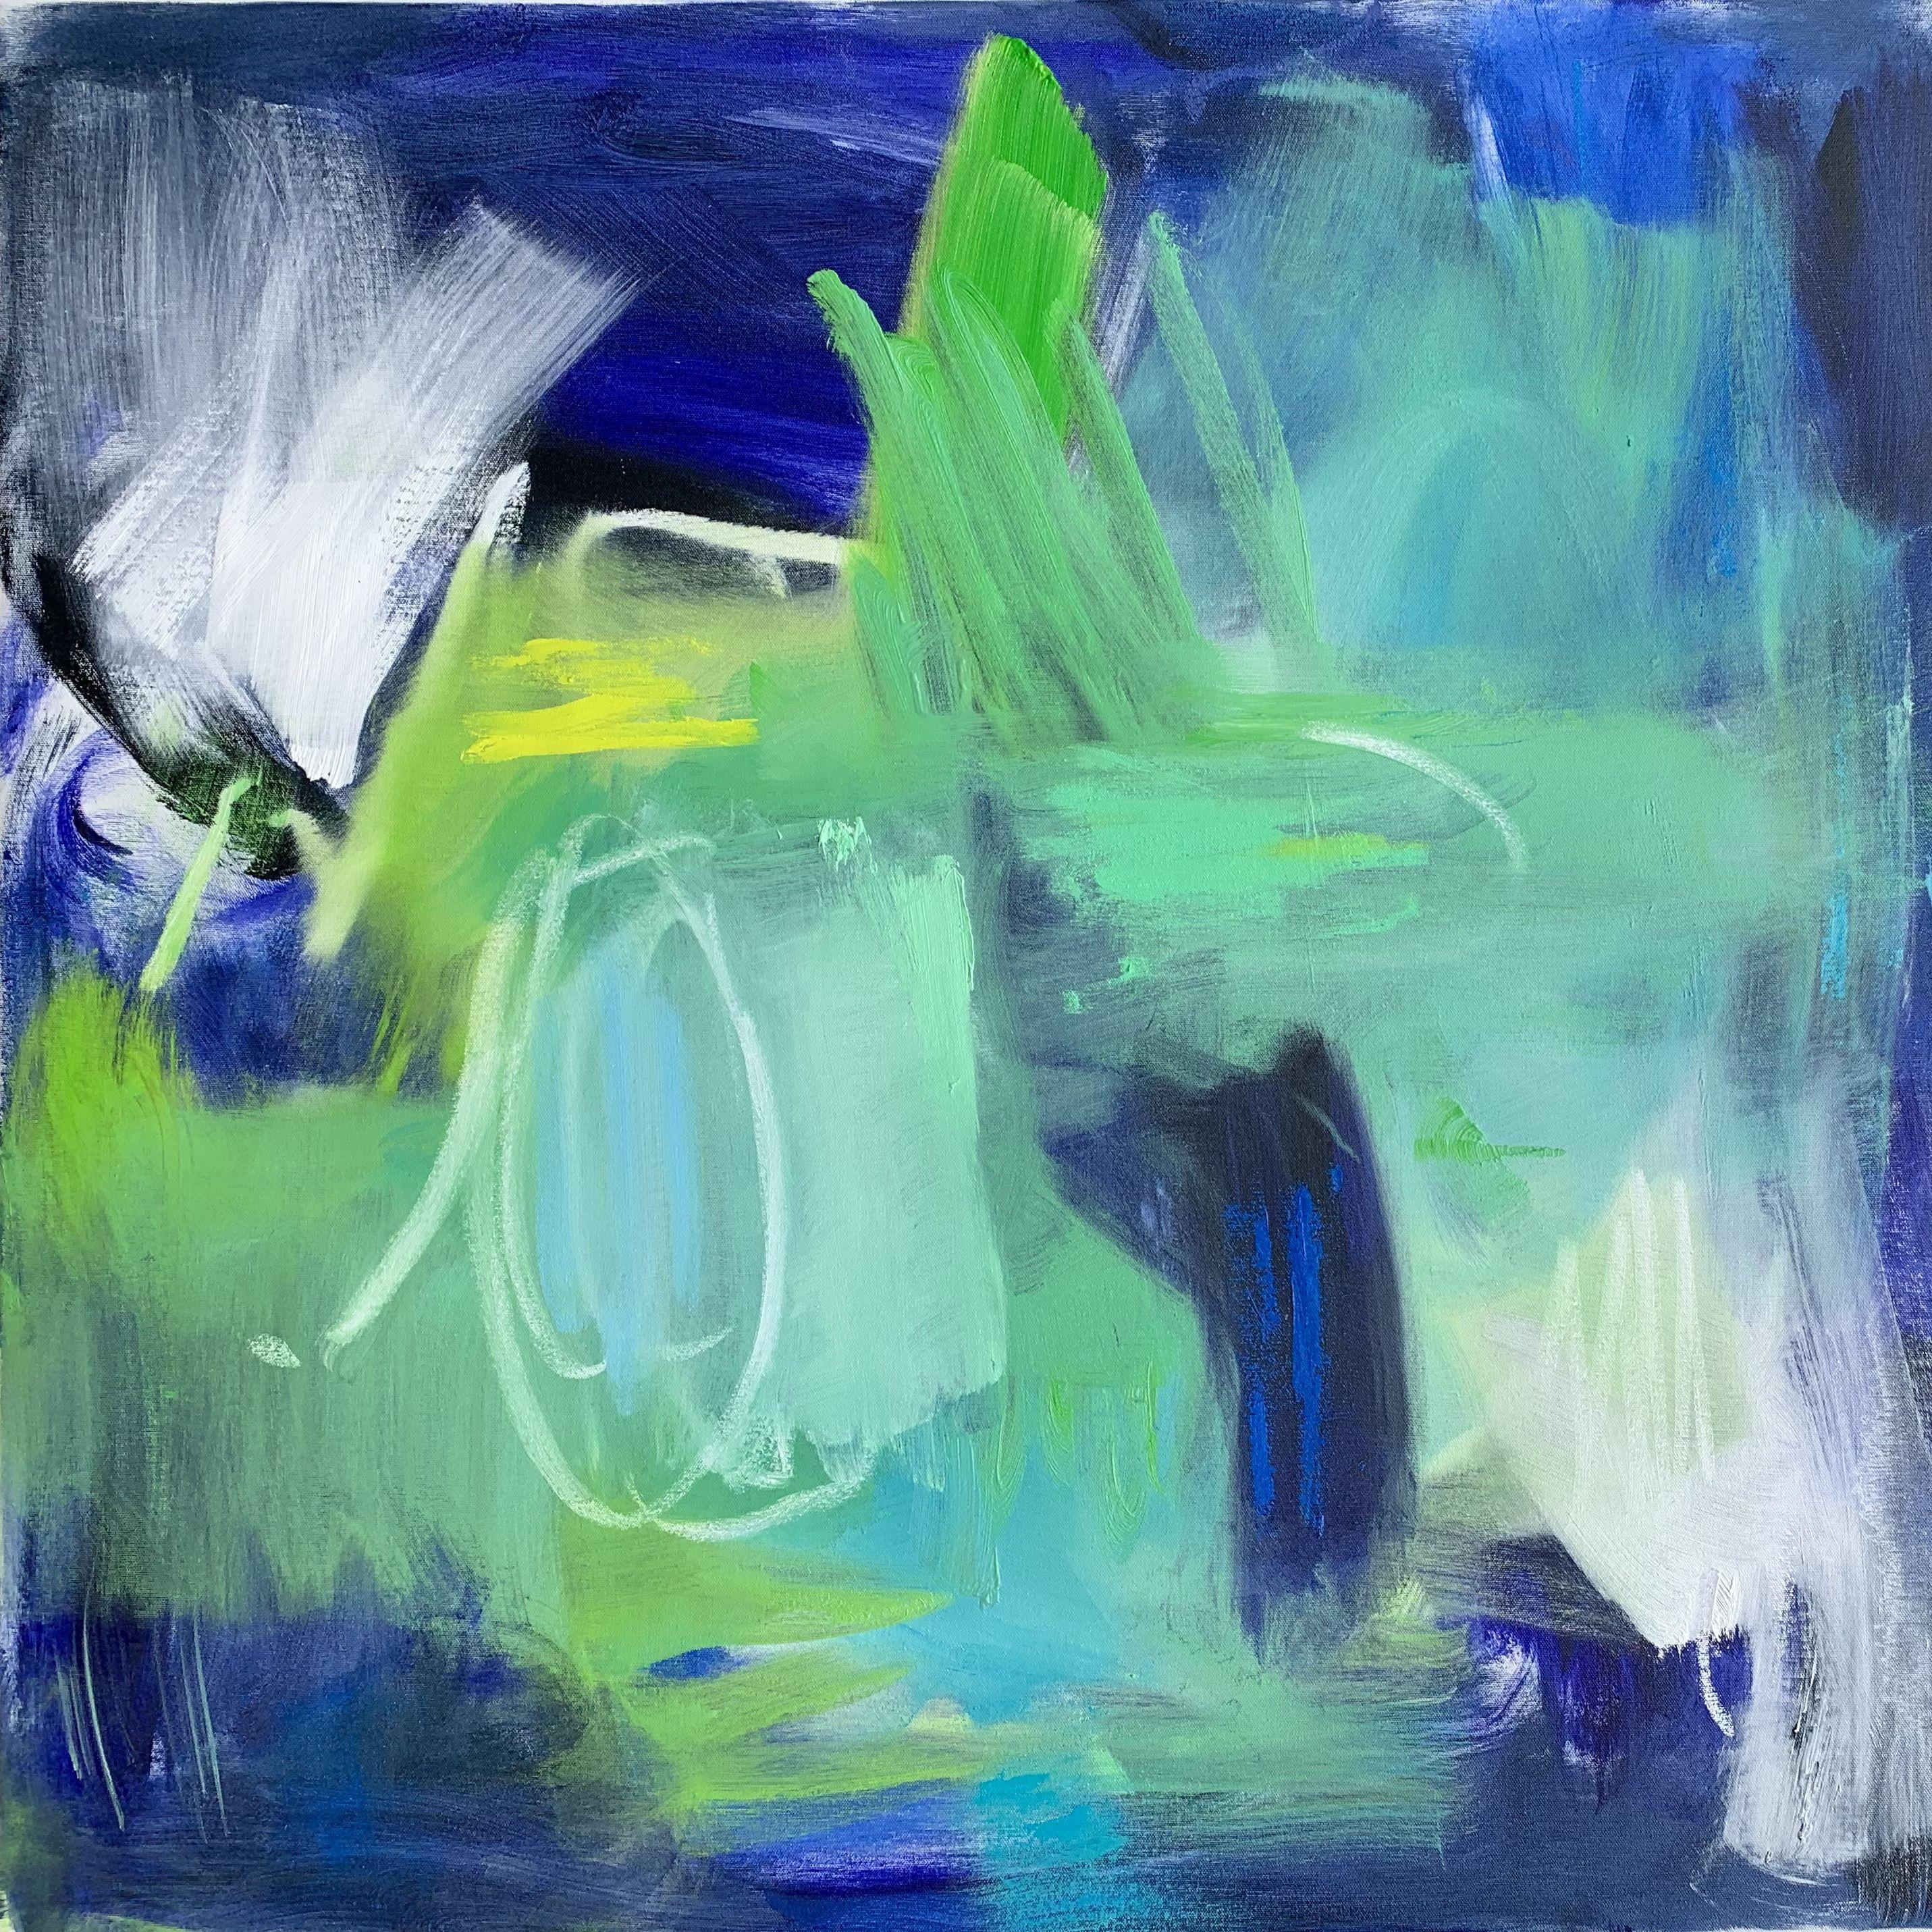 "Nantucket" is a stunning, dynamic show-stopper of an oil painting on canvas in the abstract expressionist style by Trixie Pitts, a trusted artist seller. The daring palette is bold and includes bright green, bright blue, dark blue, robin's egg